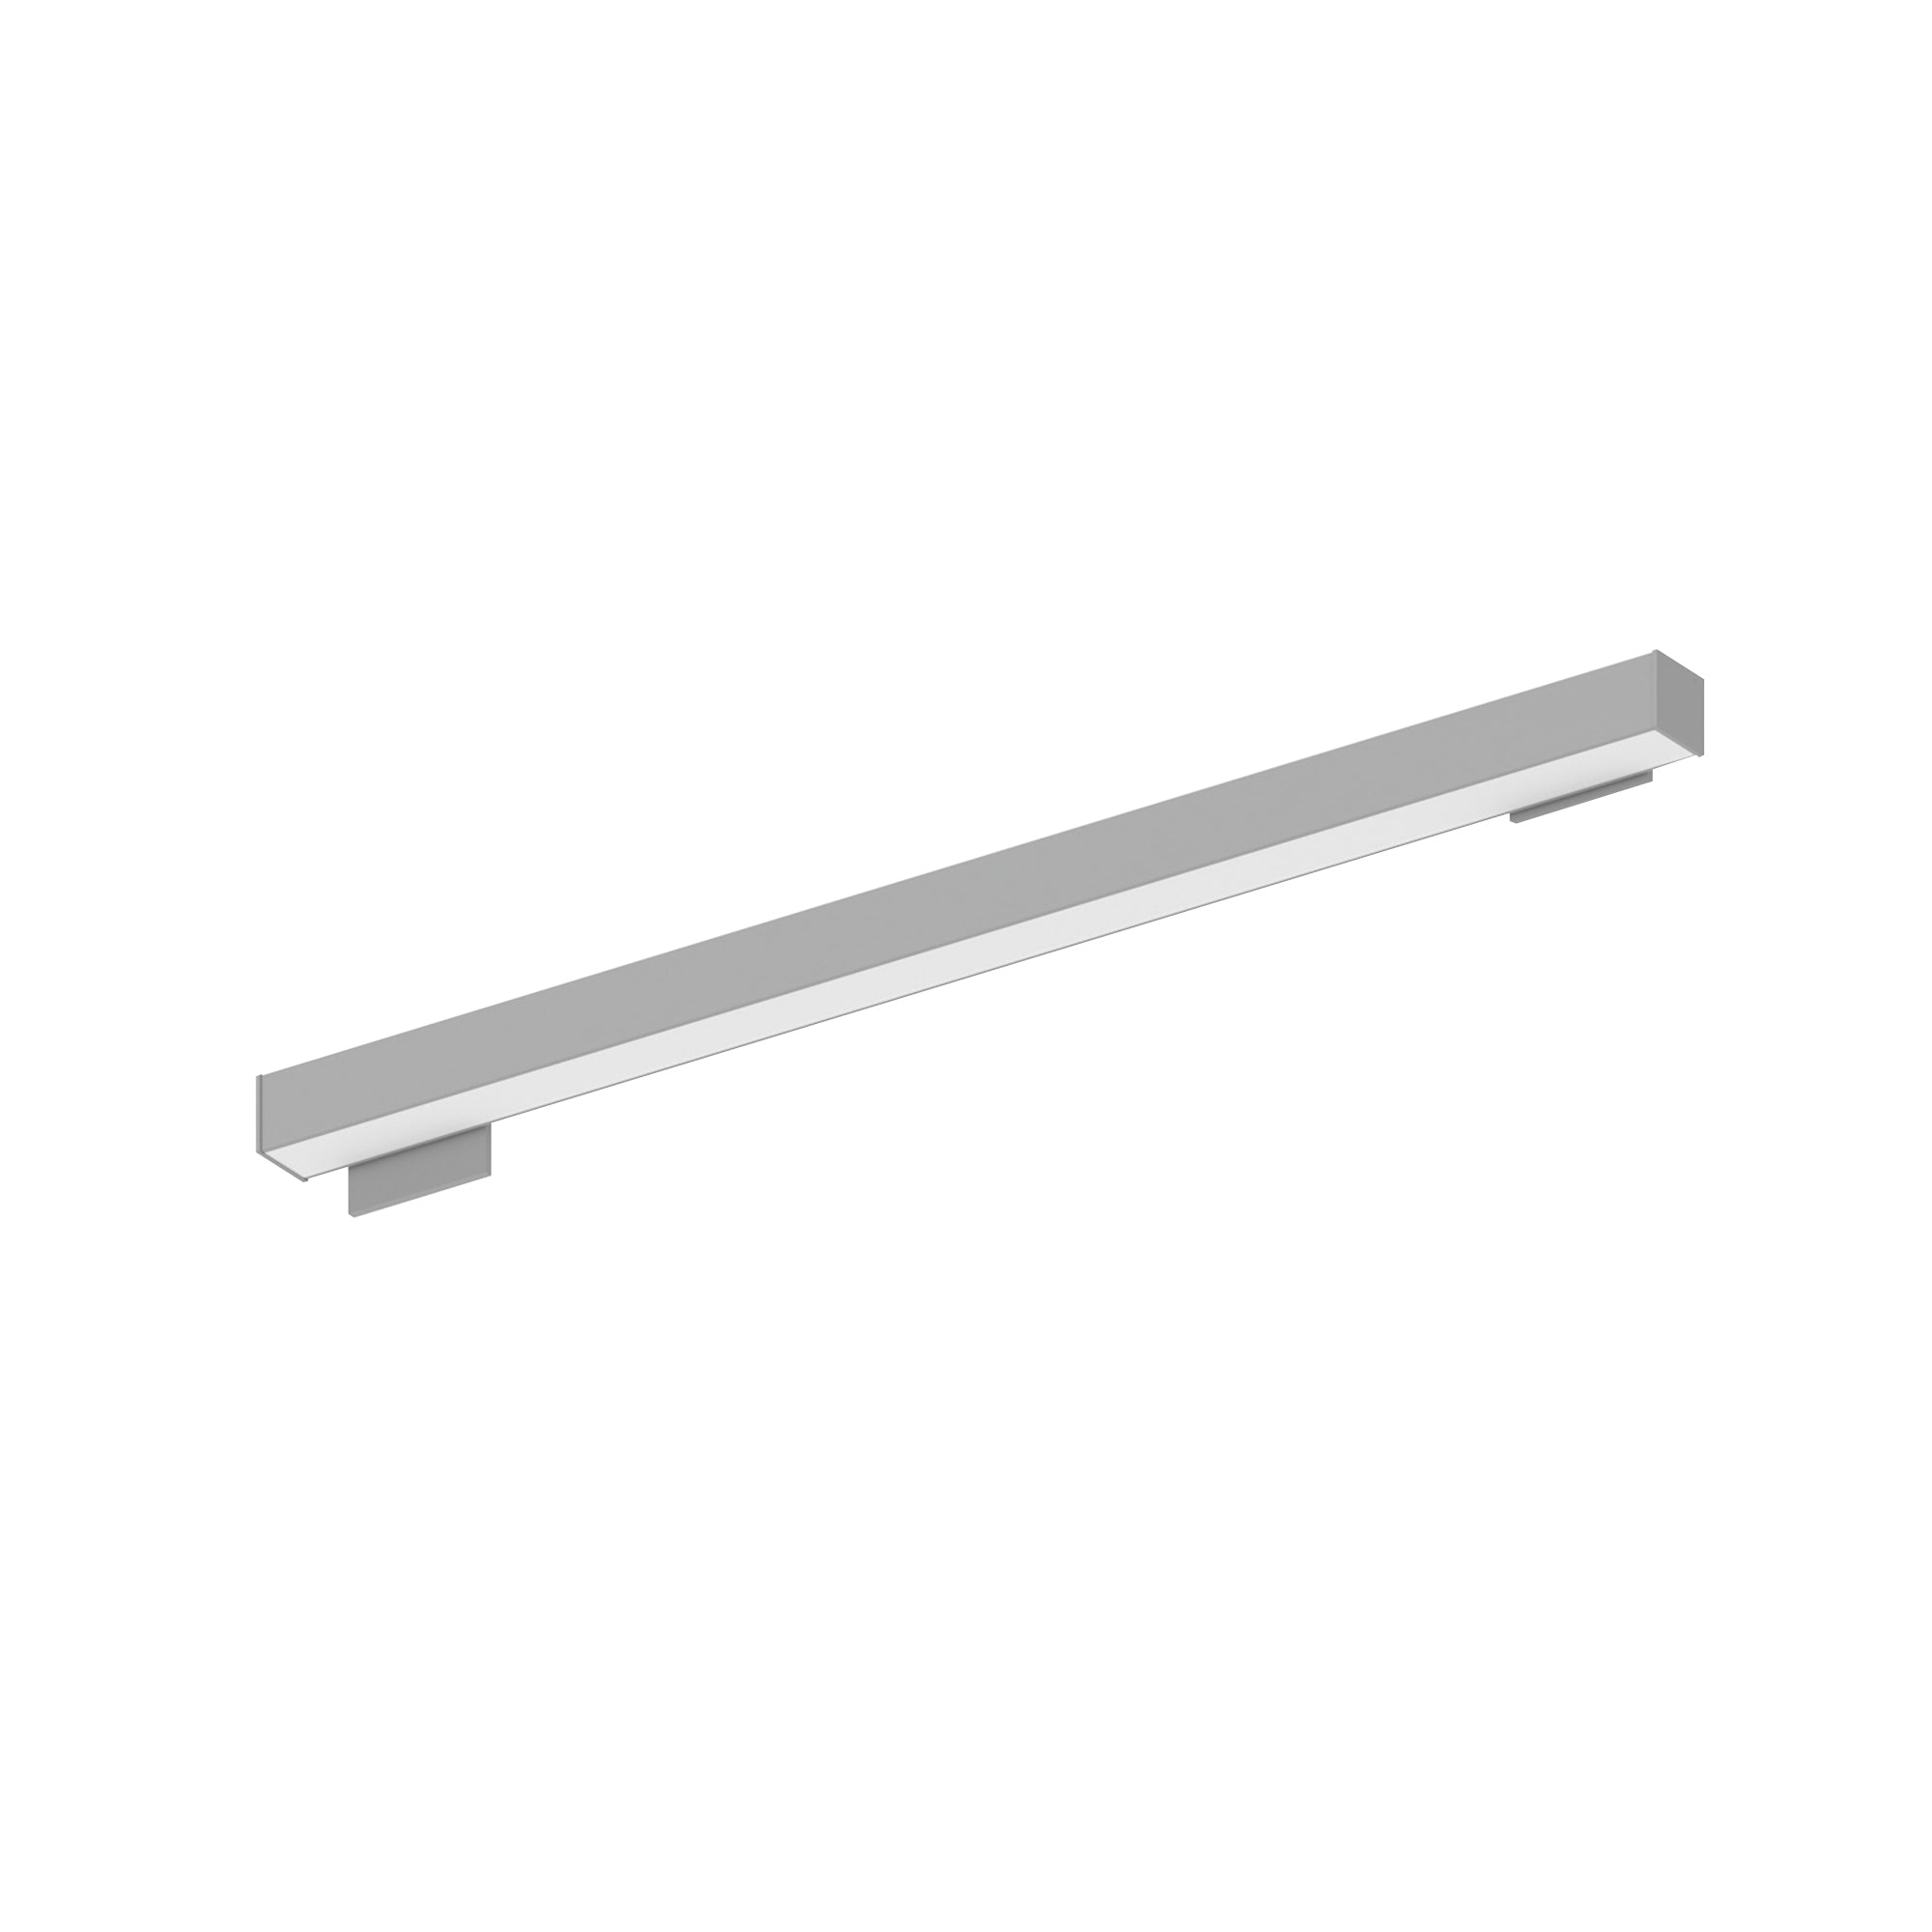 Nora Lighting NWLIN-41030A/L4-R2P - Linear - 4' L-Line LED Wall Mount Linear, 4200lm / 3000K, 4 Inchx4 Inch Left Plate & 2 Inchx4 Inch Right Plate, Right Power Feed, Aluminum Finish